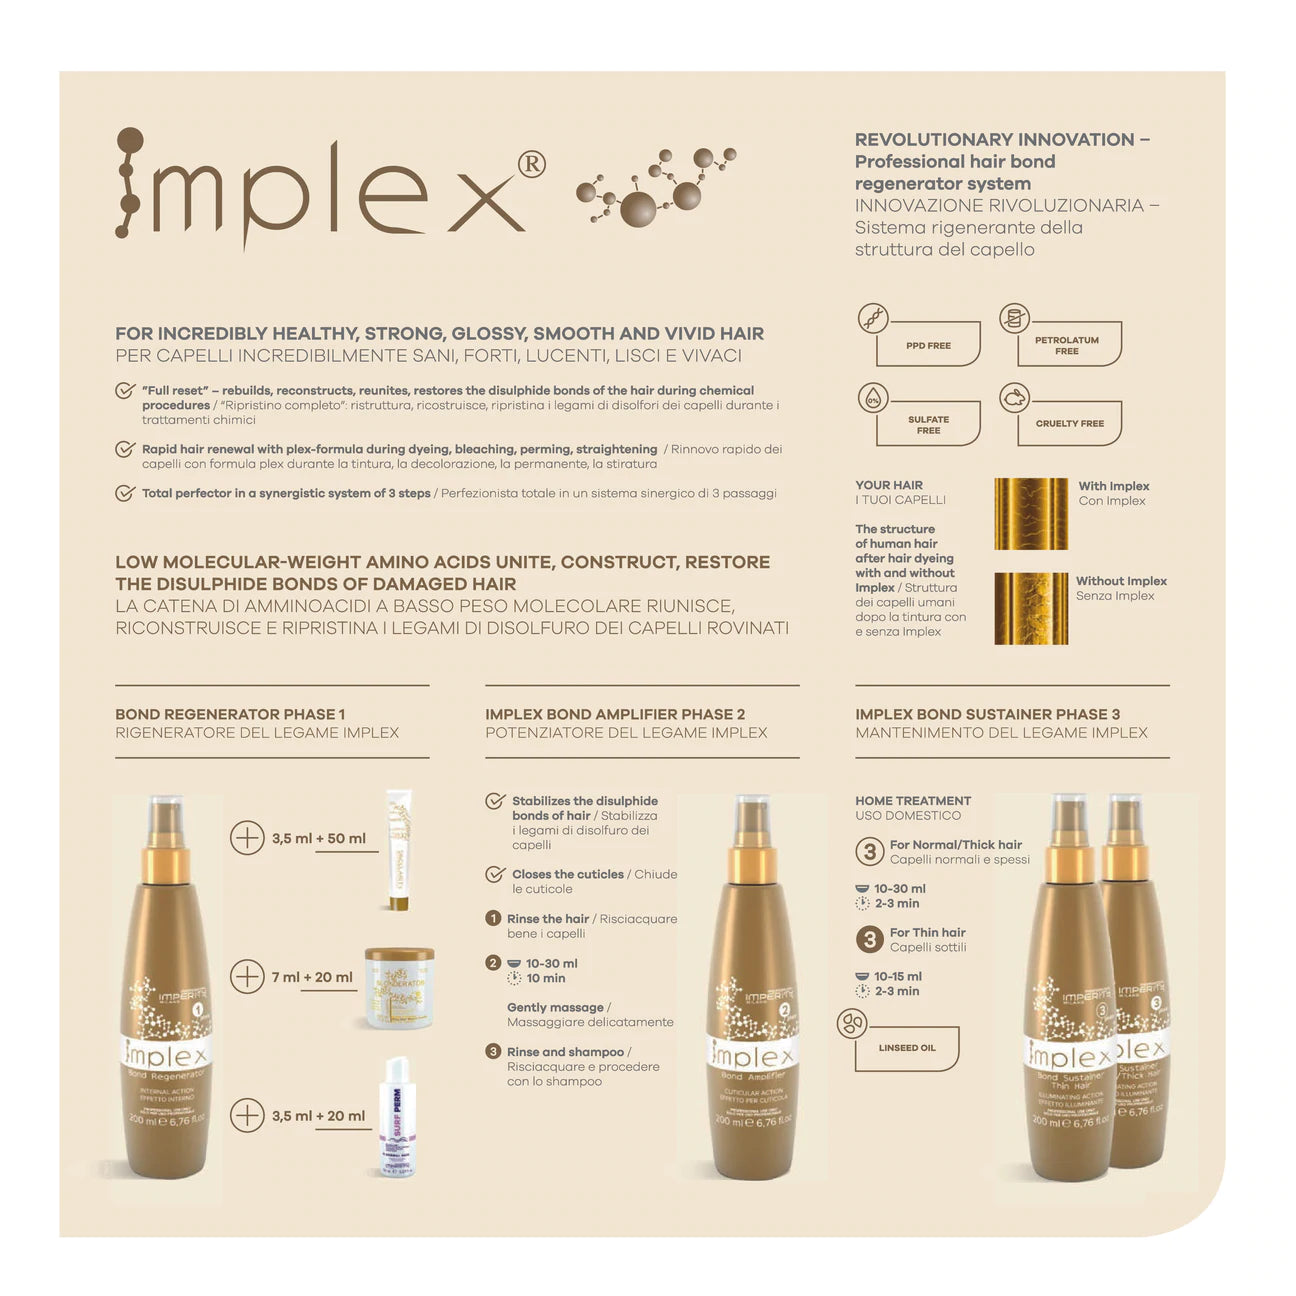 Implex Bond Sustainer Normal/ Thick Hair Phase 3